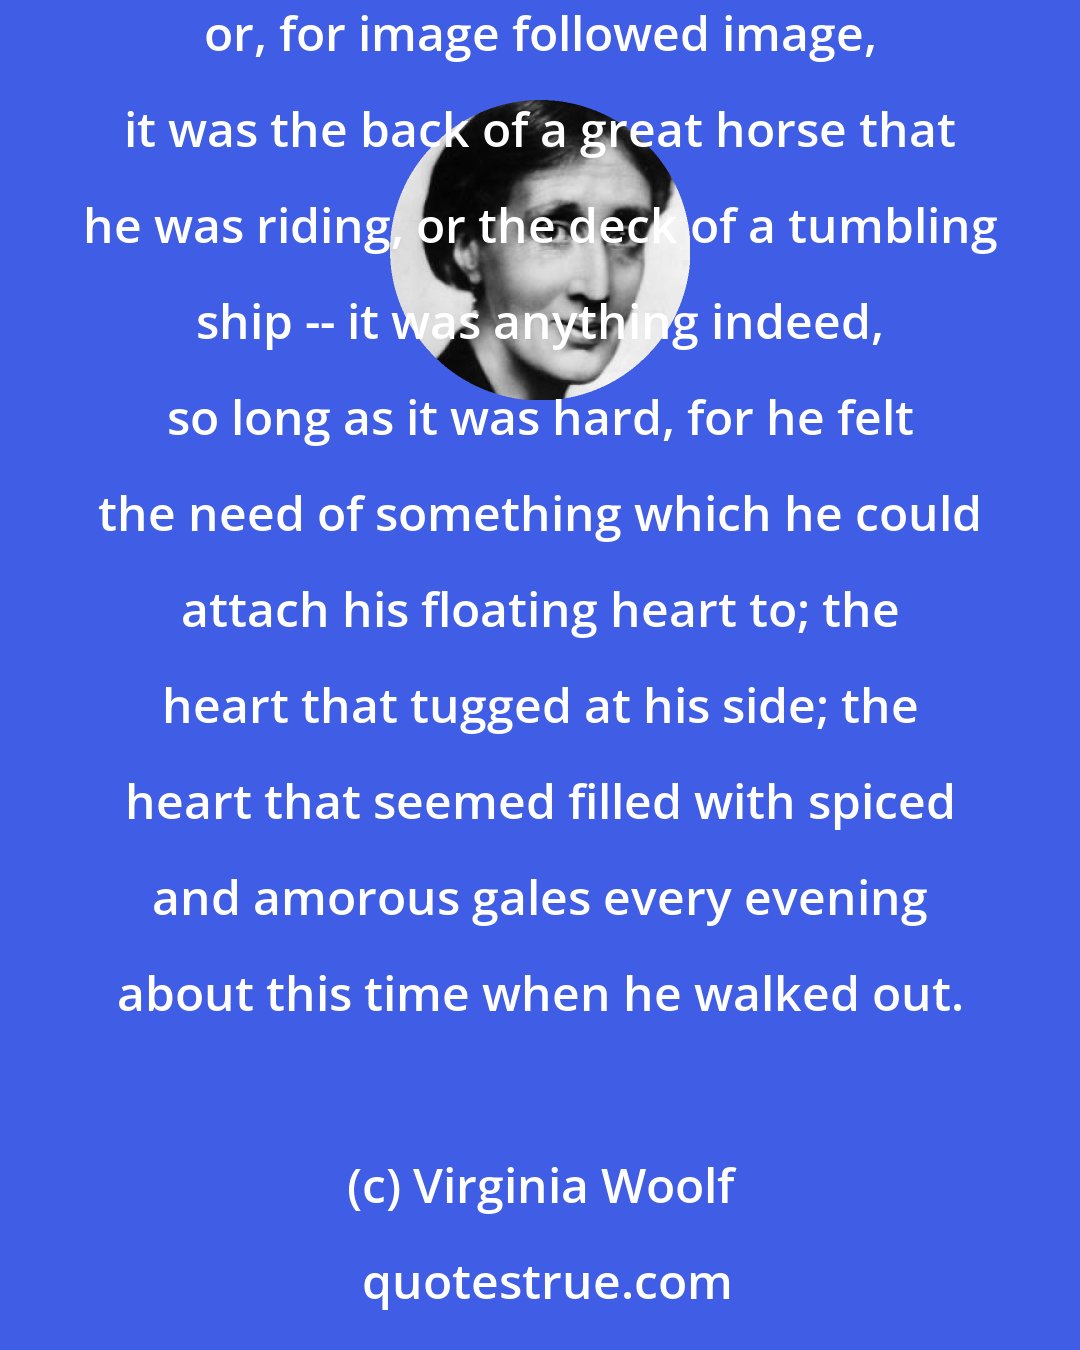 Virginia Woolf: He loved, beneath all this summer transiency, to feel the earth's spine beneath him; for such he took the hard root of the oak tree to be; or, for image followed image, it was the back of a great horse that he was riding, or the deck of a tumbling ship -- it was anything indeed, so long as it was hard, for he felt the need of something which he could attach his floating heart to; the heart that tugged at his side; the heart that seemed filled with spiced and amorous gales every evening about this time when he walked out.